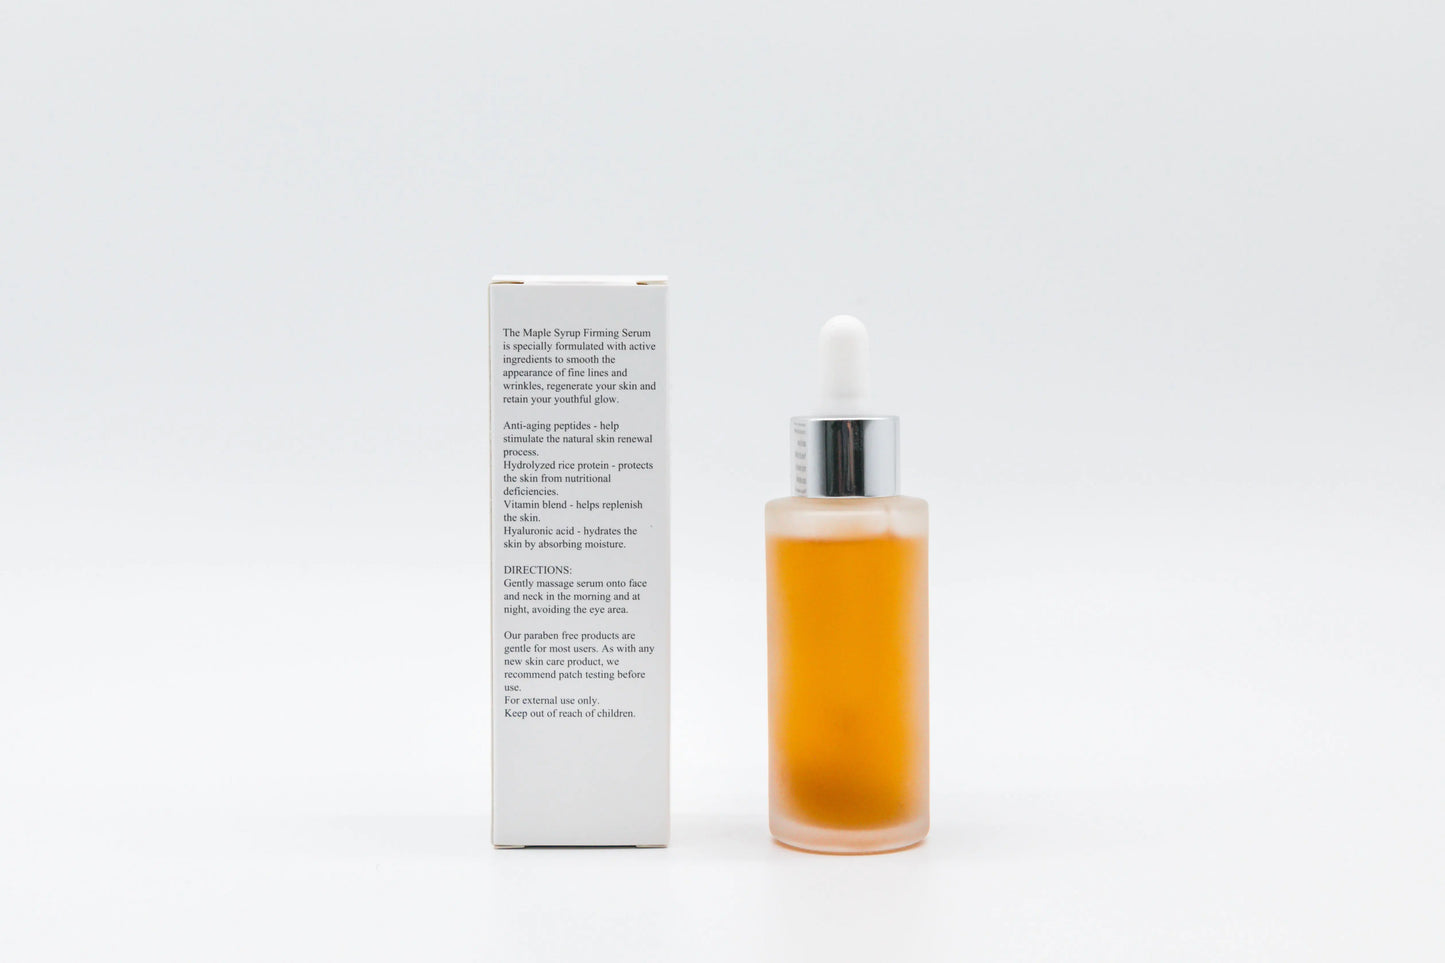 Maple Syrup Firming Serum